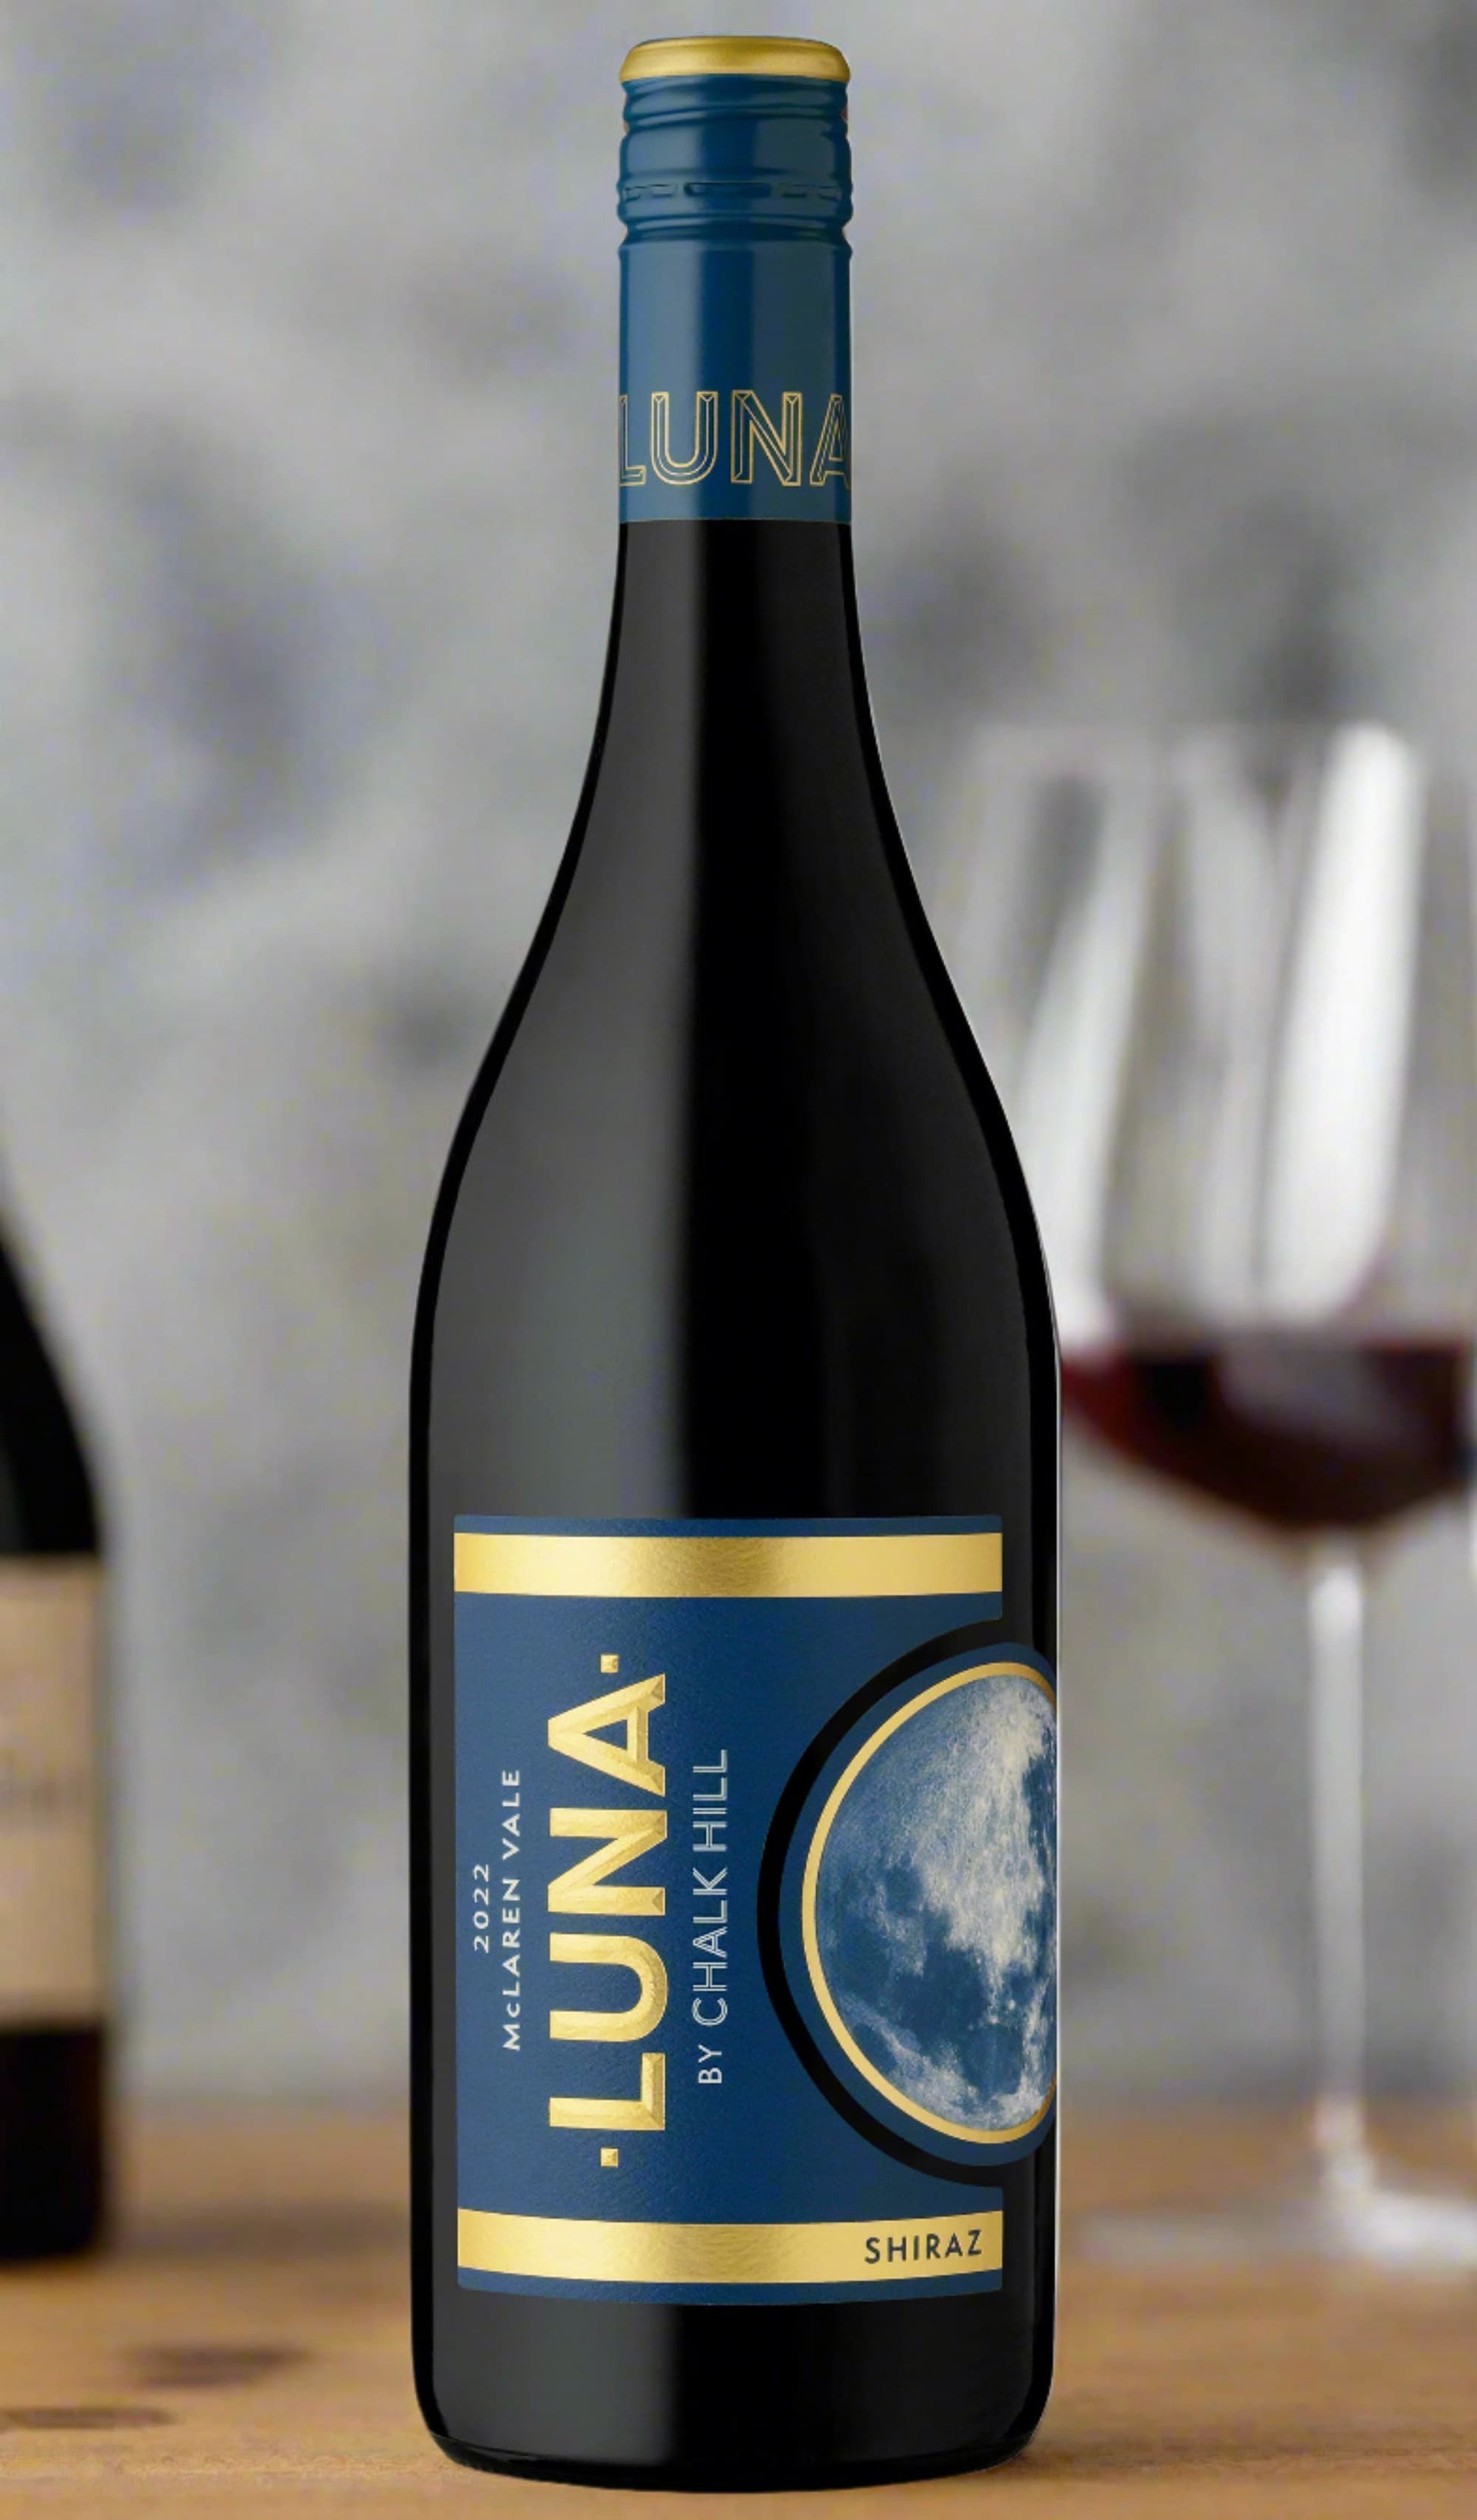 Find out more, explore the range and purchase Chalk Hill Luna Shiraz 2022 (McLaren Vale) available online at Wine Sellers Direct - Australia's independent liquor specialists.